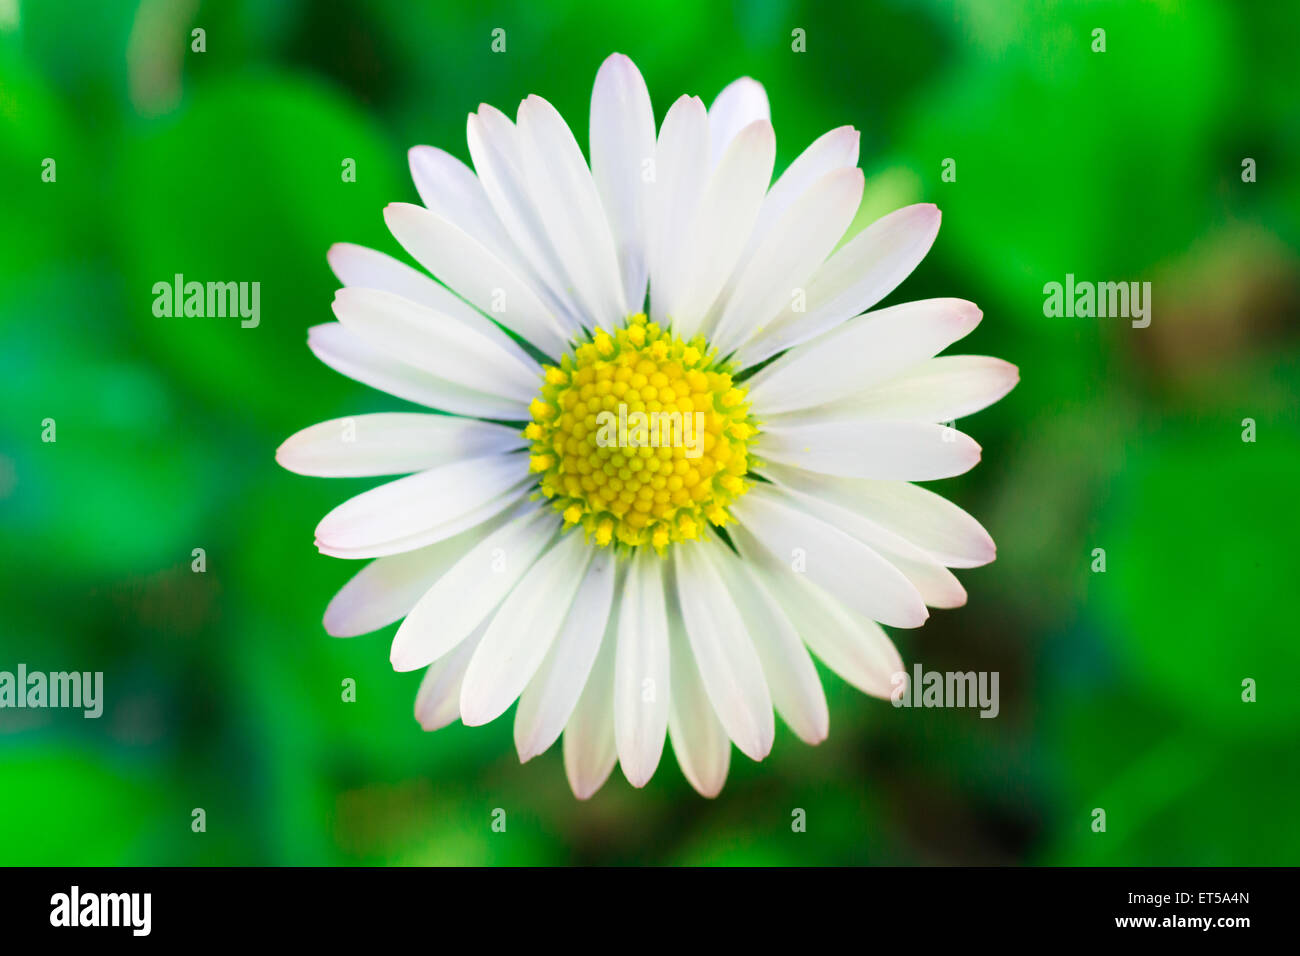 A Beautiful White Oxeye Daisy Standing Against a Green Backdrop Stock Photo